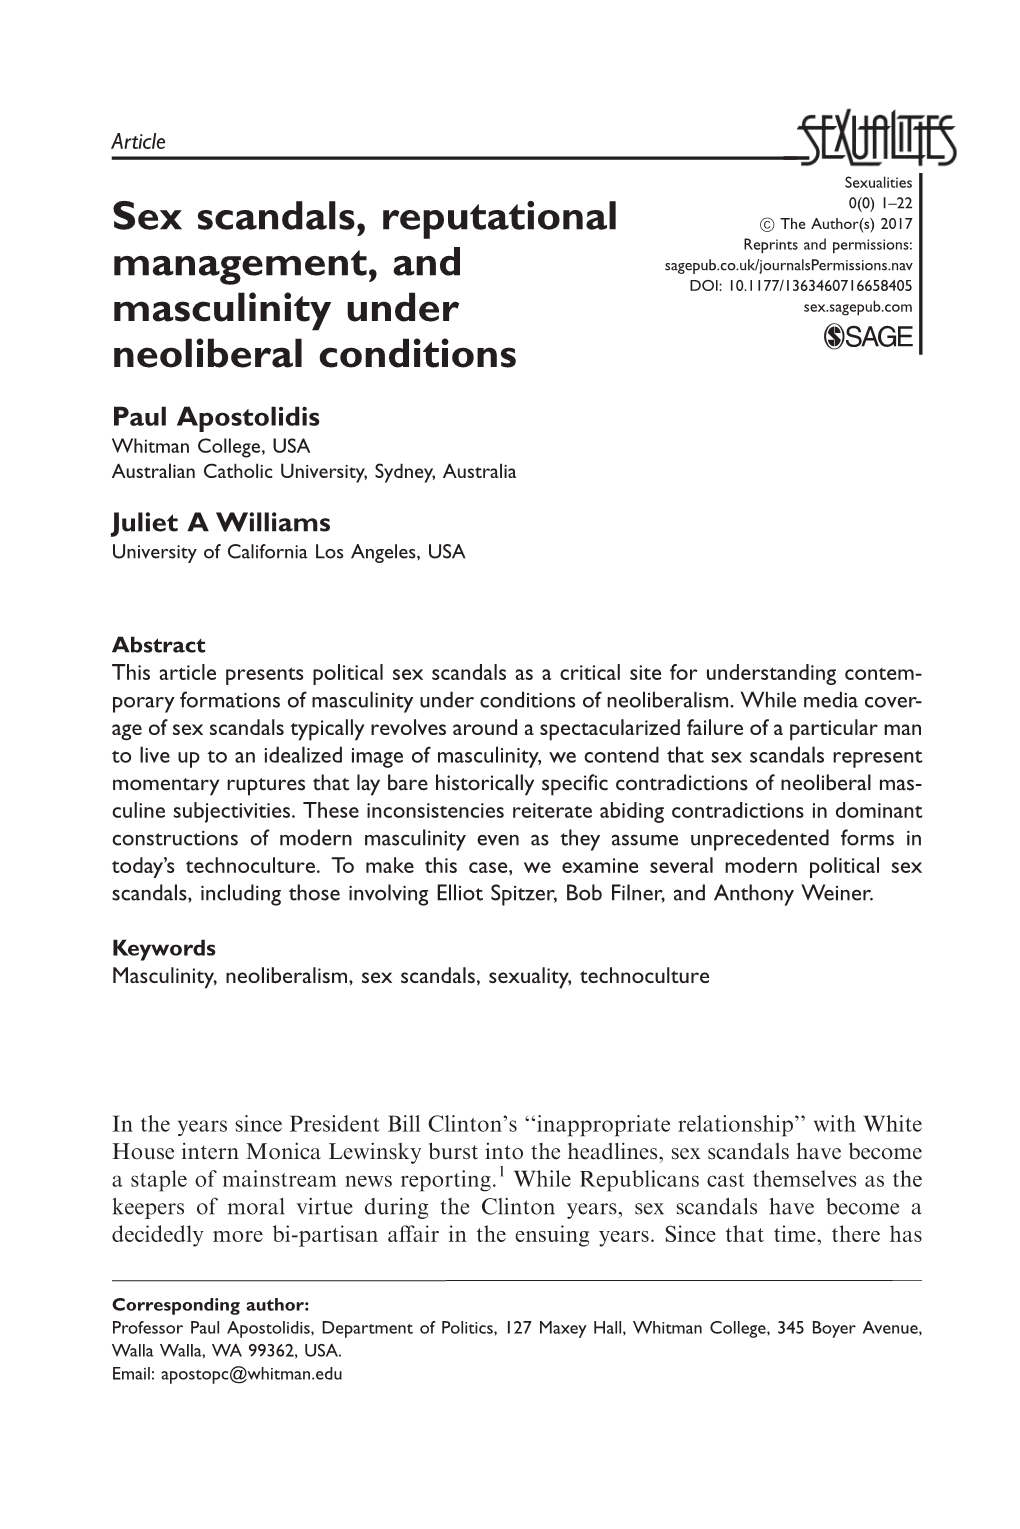 Sex Scandals, Reputational Management, and Masculinity